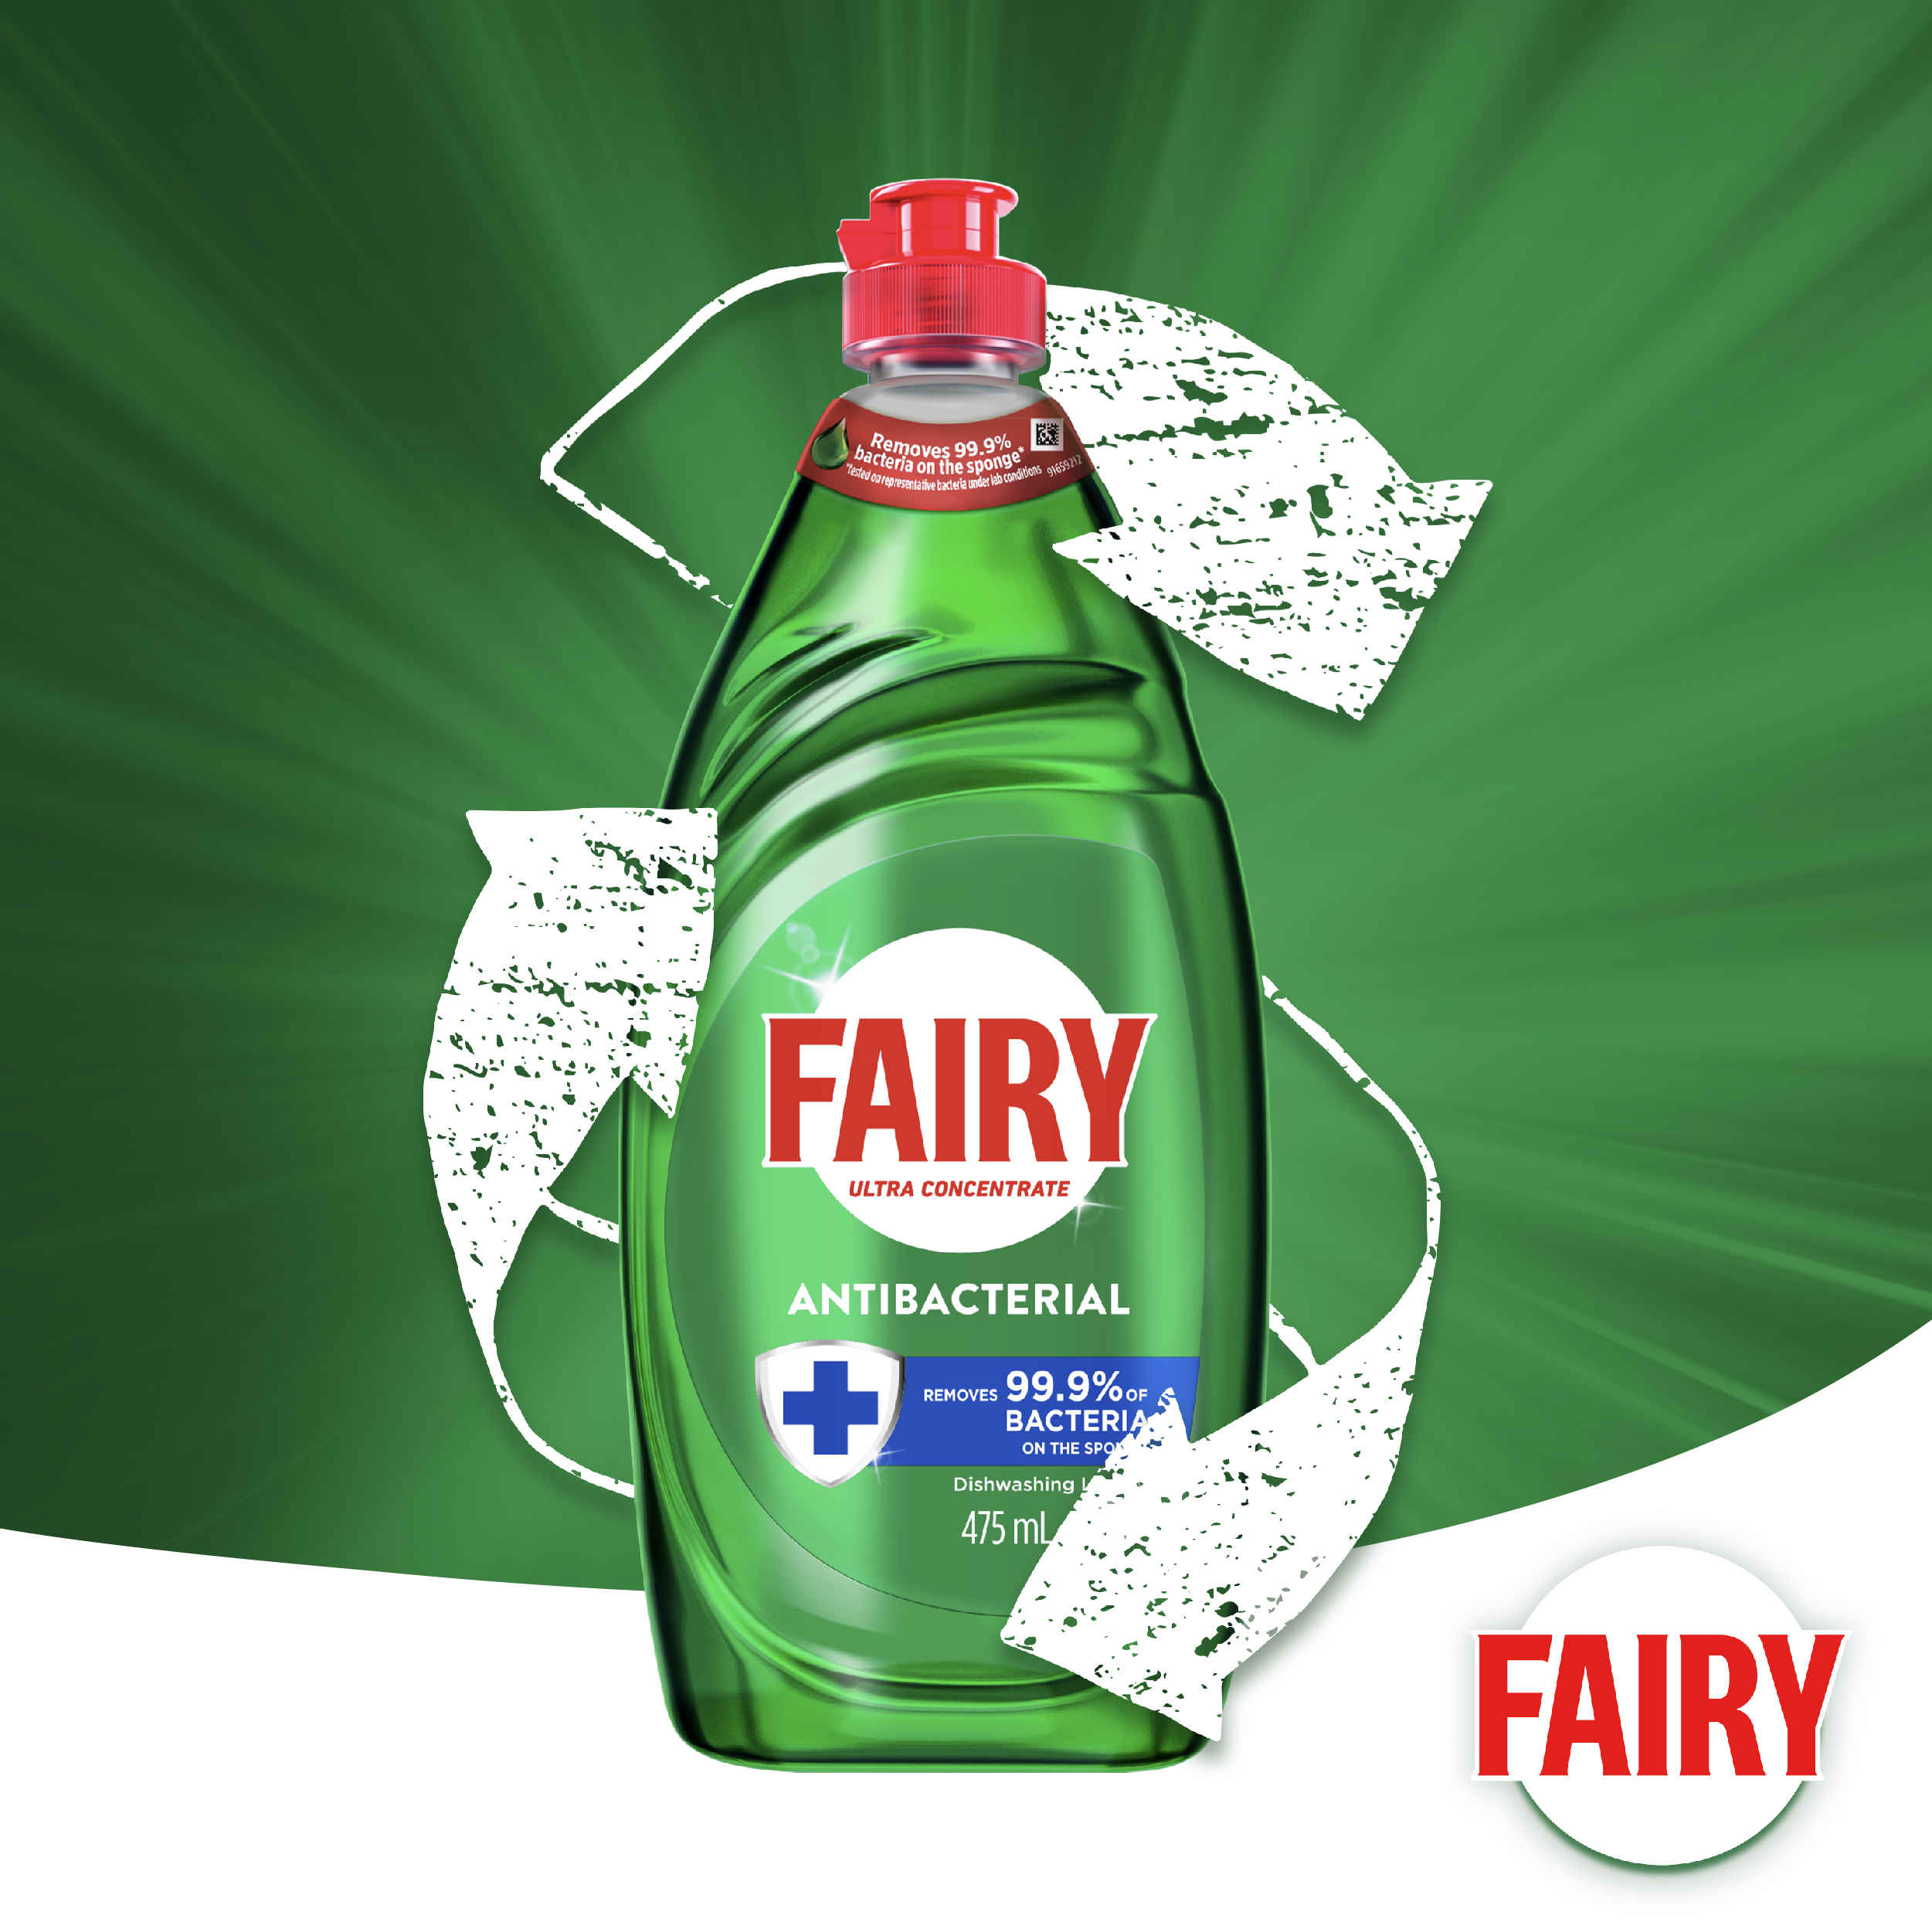 Fairy Ultra Concentrate Antibacterial Dishwashing Liquid product is made with recyclable terracycle packaging